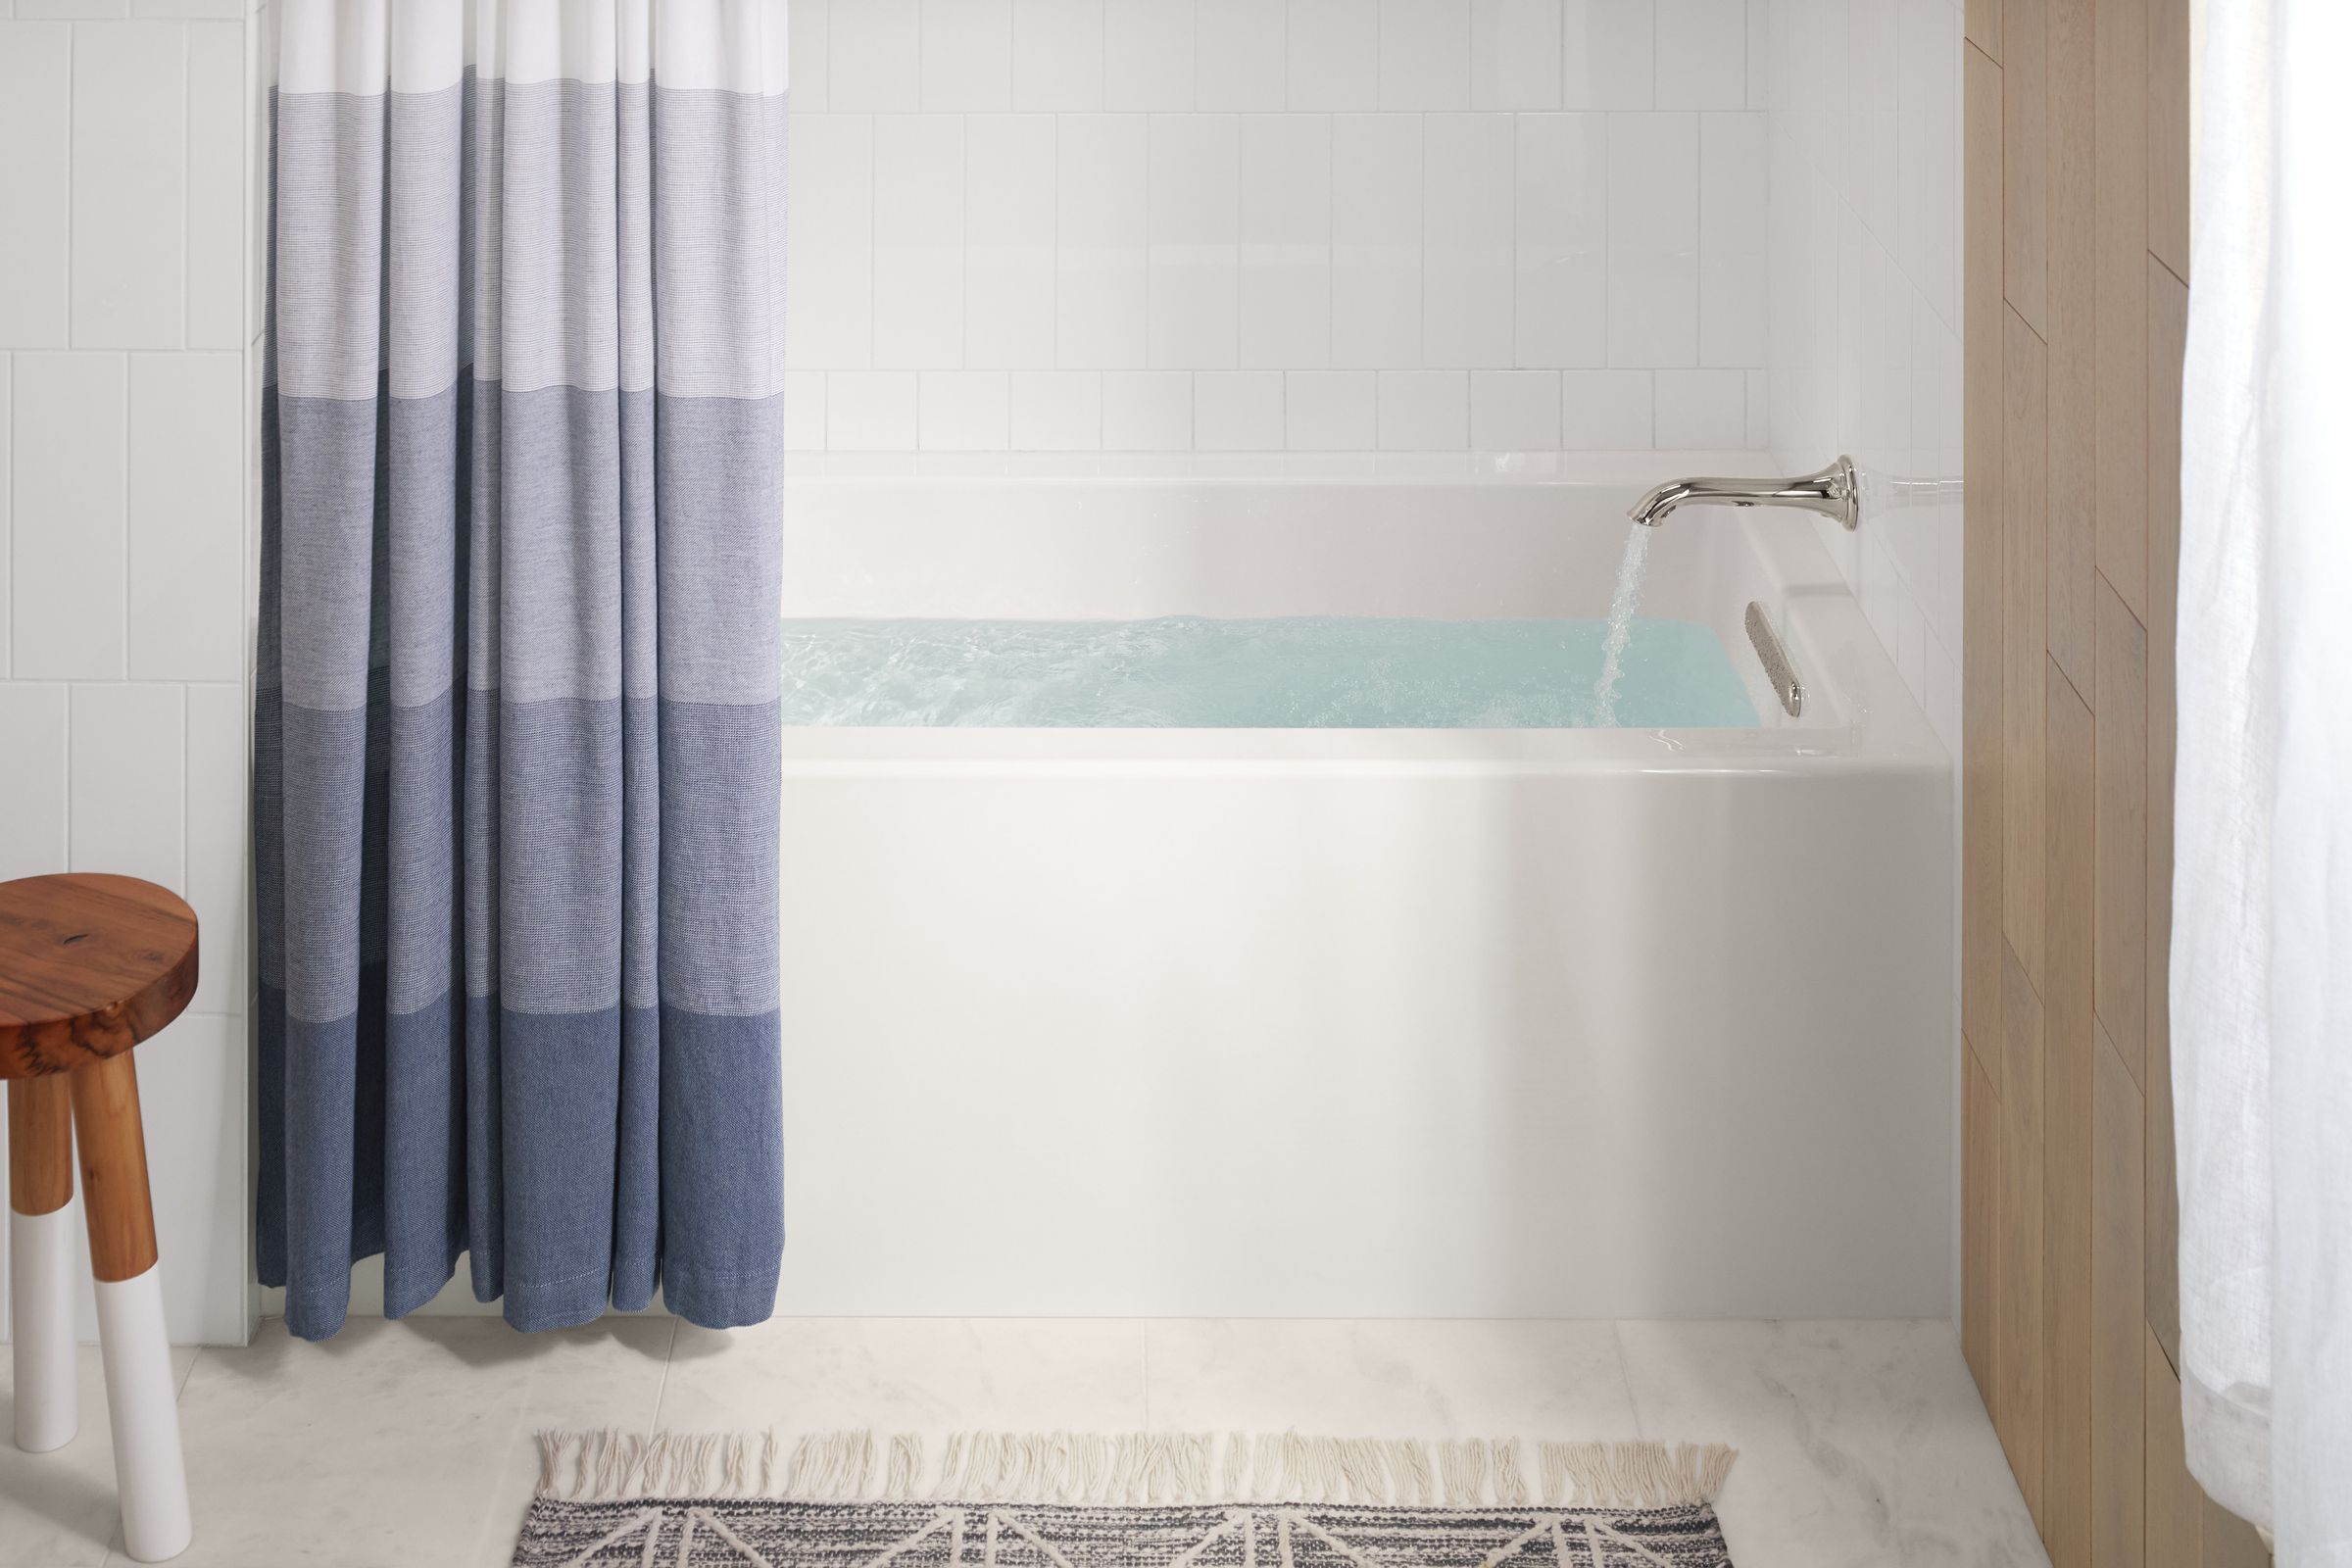 Kohler’s PerfectFill technology can run your bath for you.